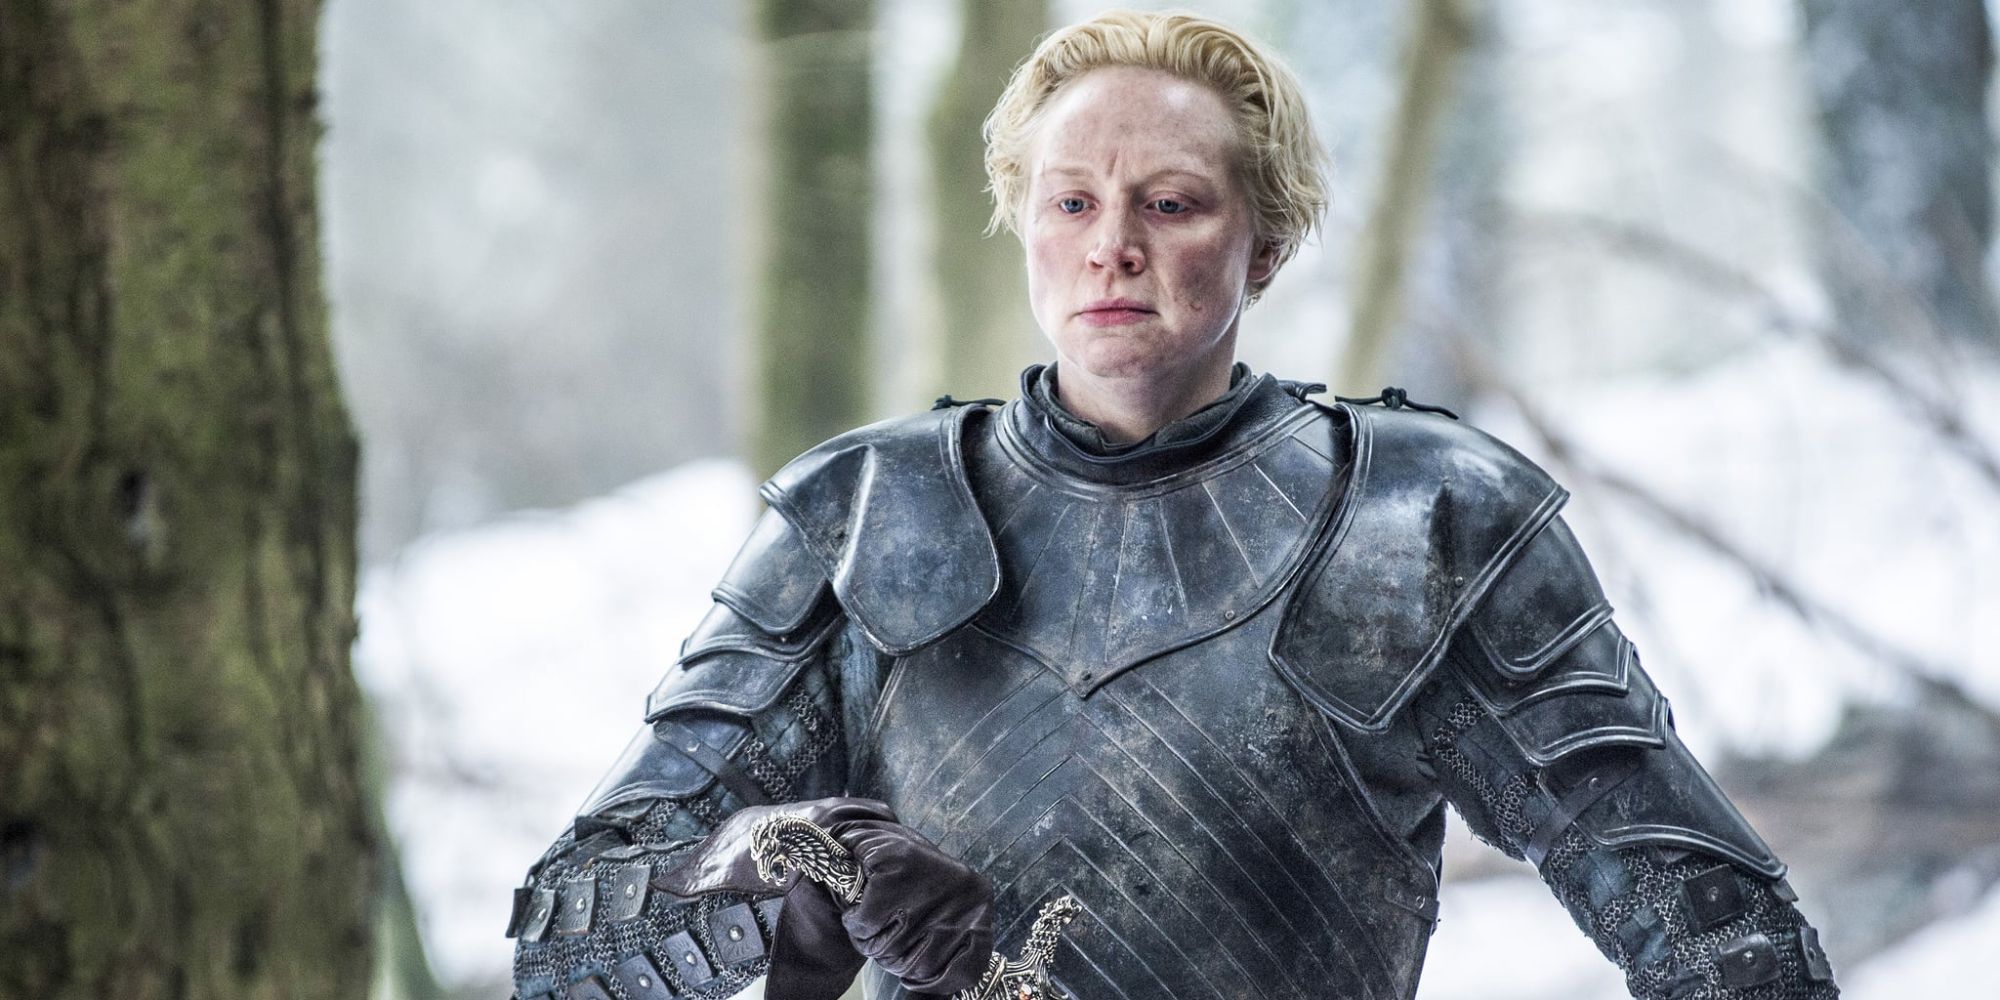 Brienne finds Sansa and offers her sword in Game of Thrones